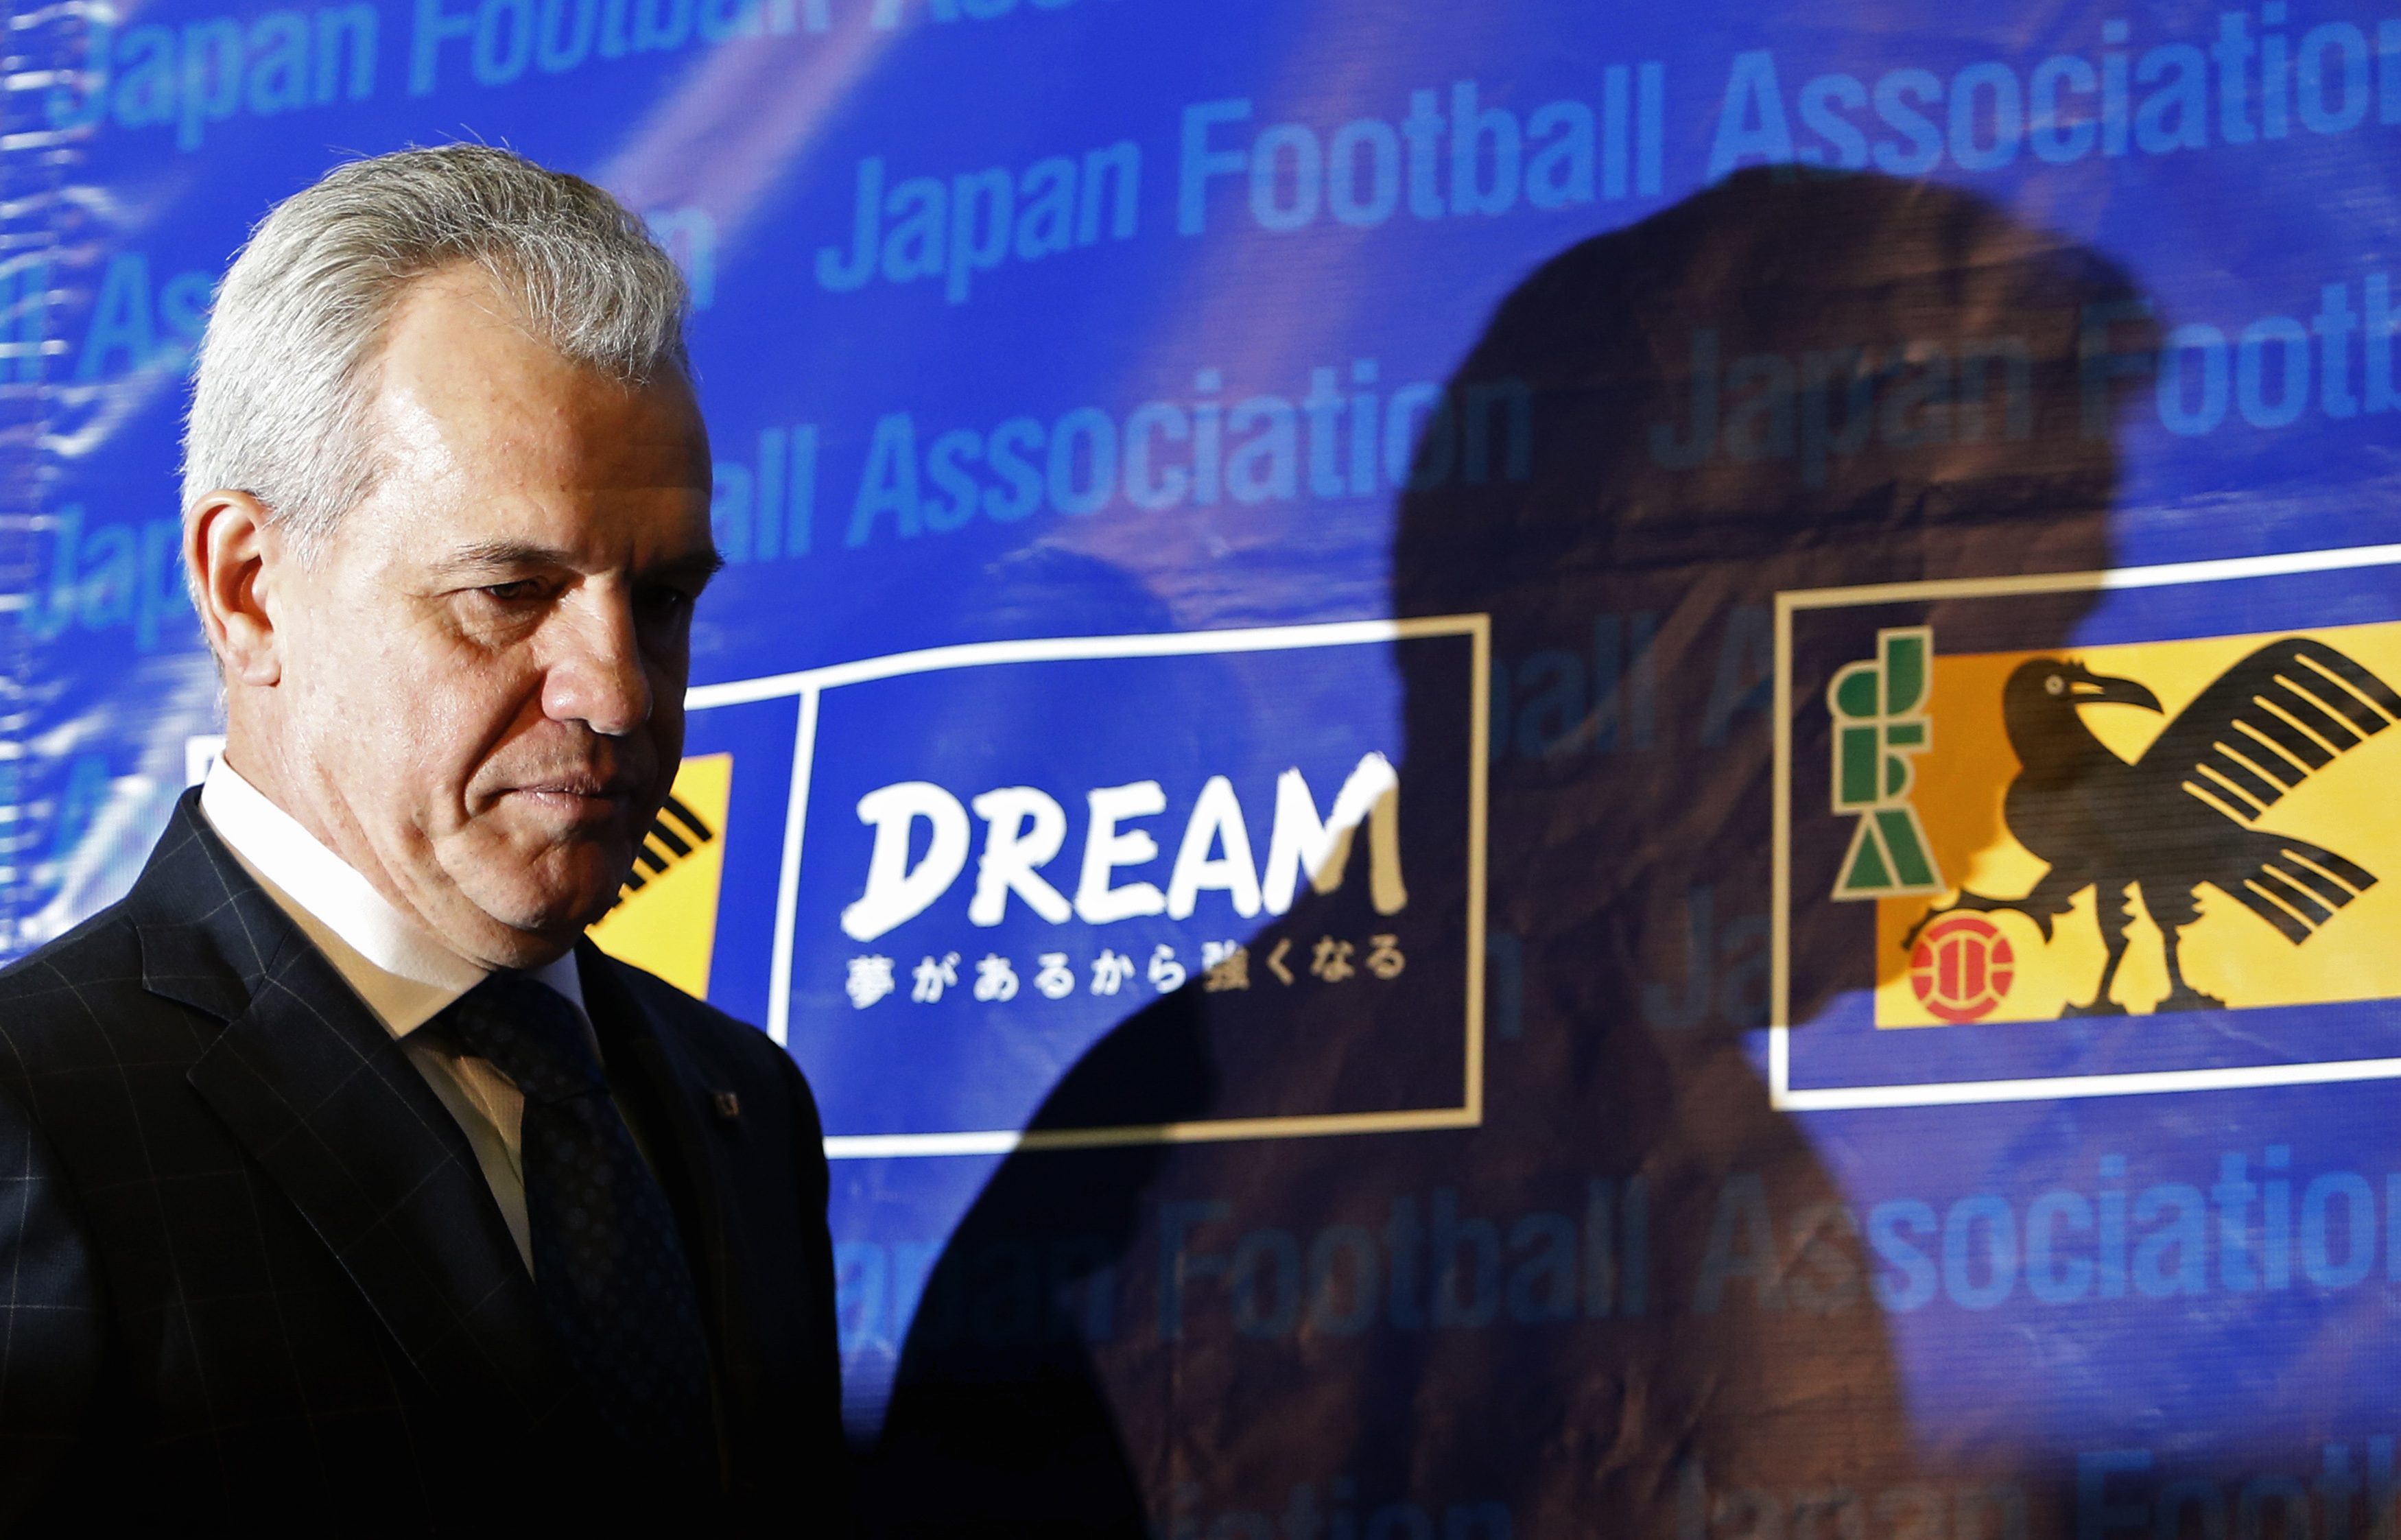 Japan's national soccer team head coach Javier Aguirre of Mexico walks into a news conference at the Japan Football Association headquarters in Tokyo in this December 27, 2014 file photograph. The Japan Football Association (JFA) announced on February 3, 2015 they have terminated the contract of coach Javier Aguirre. REUTERS/Yuya Shino/Files (JAPAN - Tags: SPORT SOCCER)